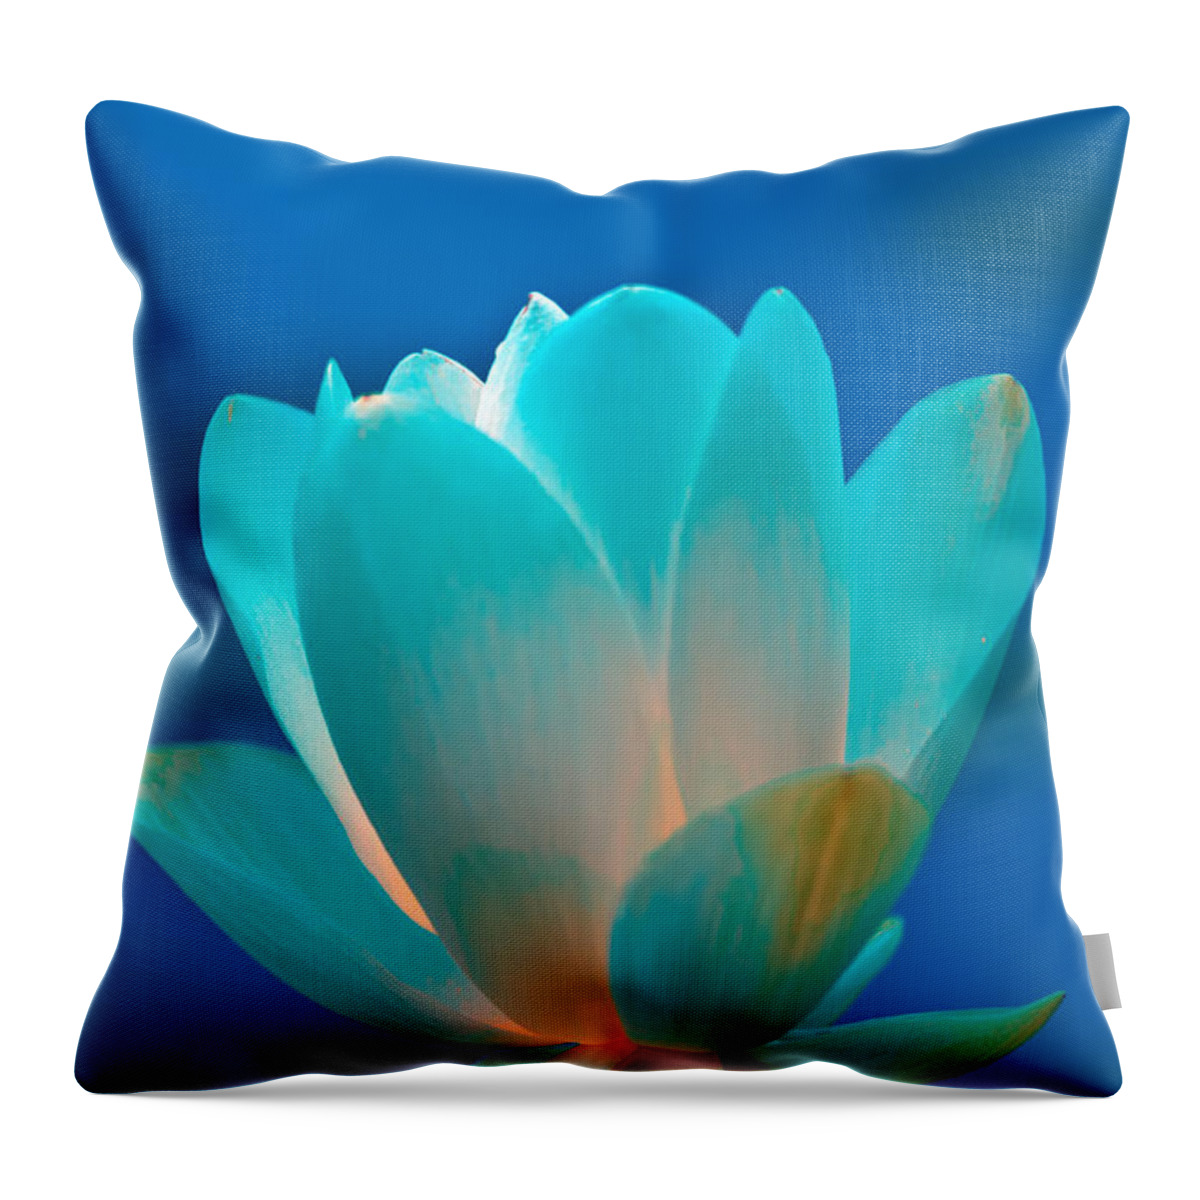 Lotus Lillie Throw Pillow featuring the photograph Lotus Natural Inner Light by Randall Branham